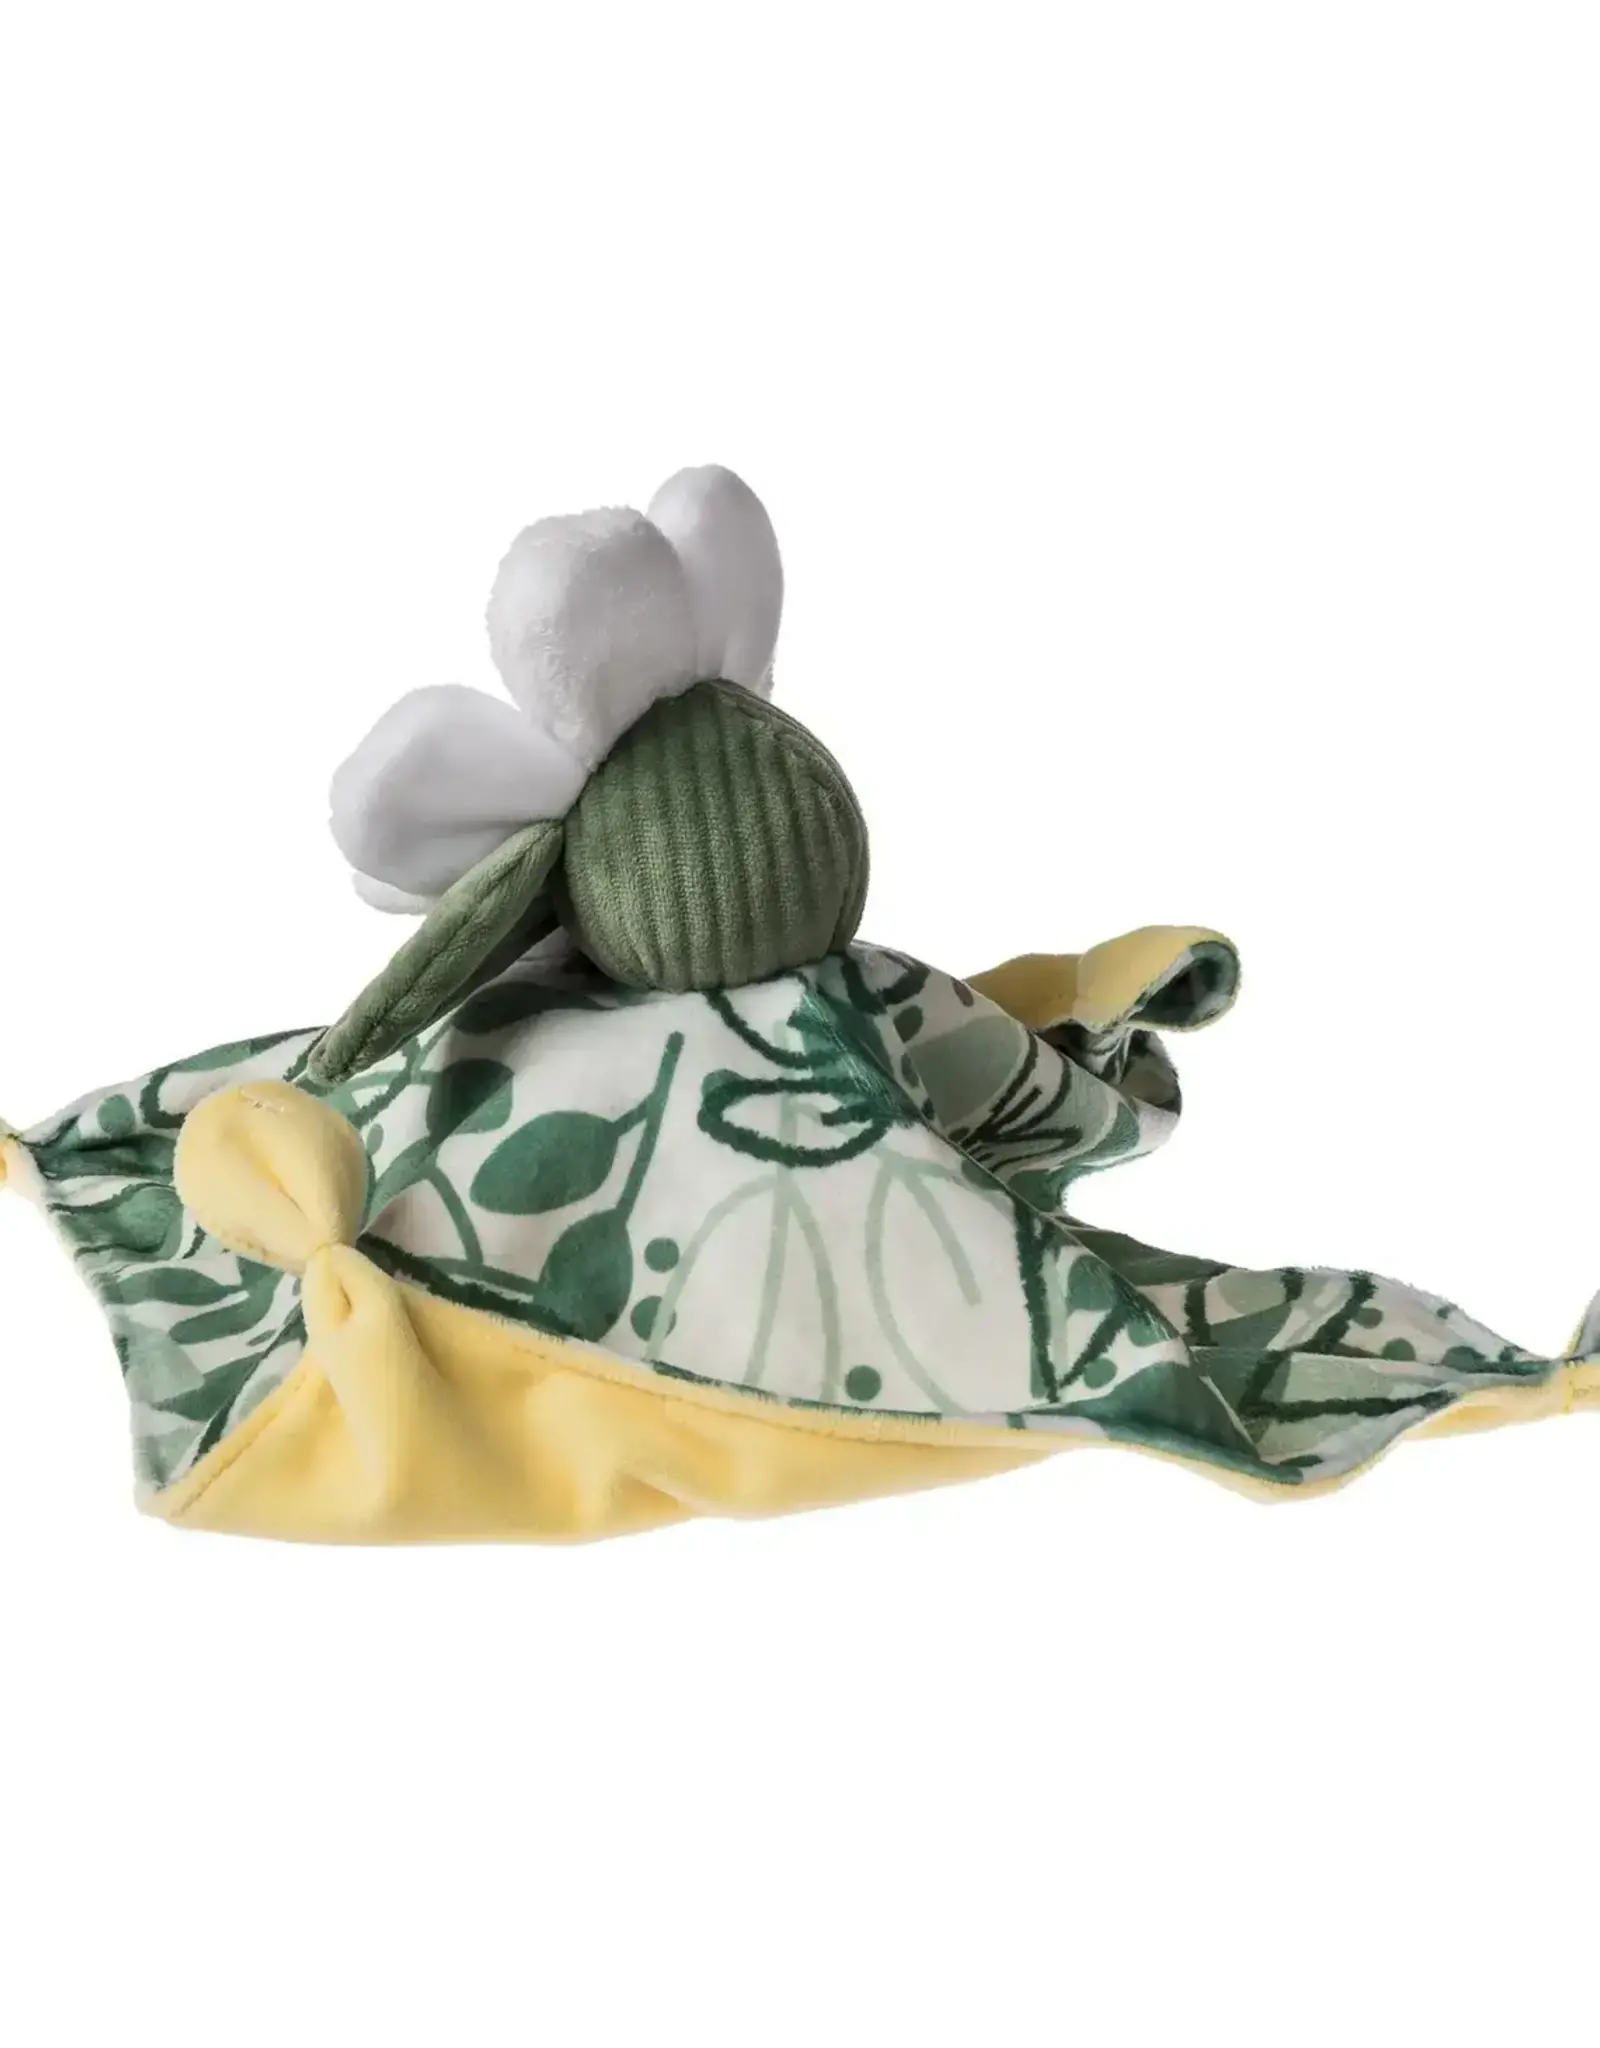 Mary Meyer Sweet Soothie Daisy Blanket